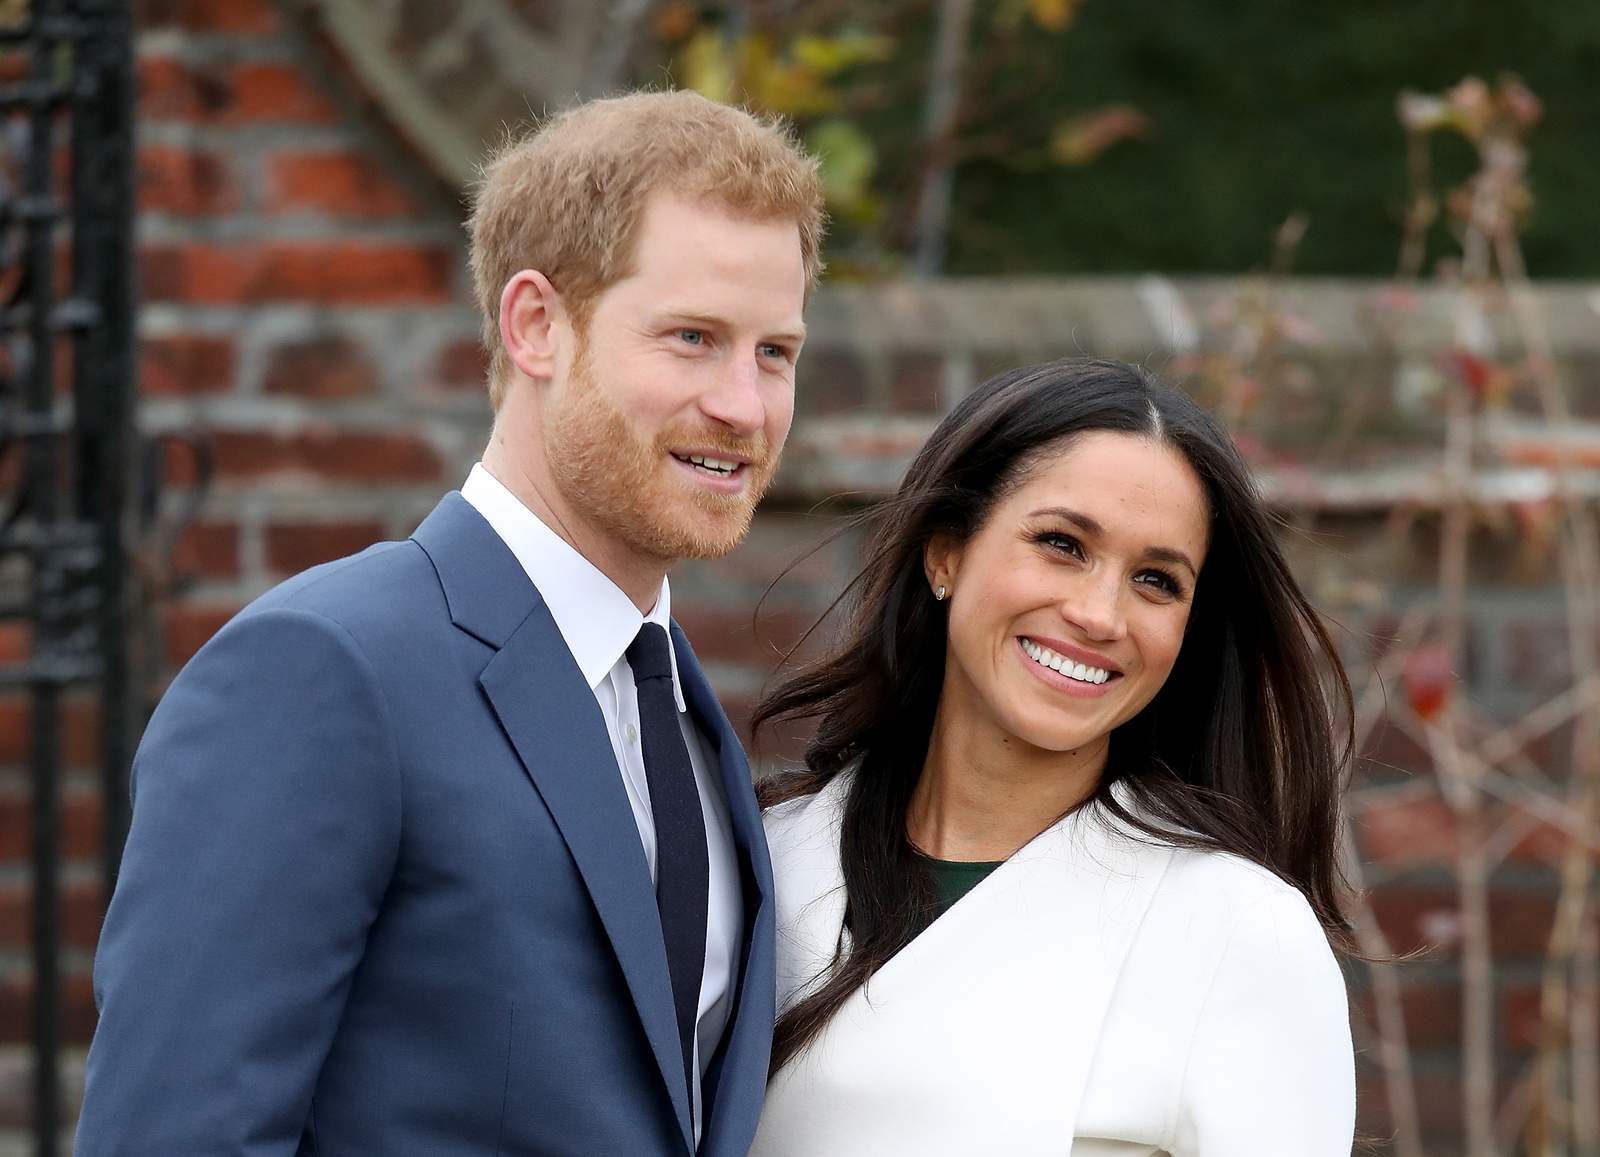 5 things we hope Oprah asks Meghan Markle and Prince Harry during their highly anticipated interview